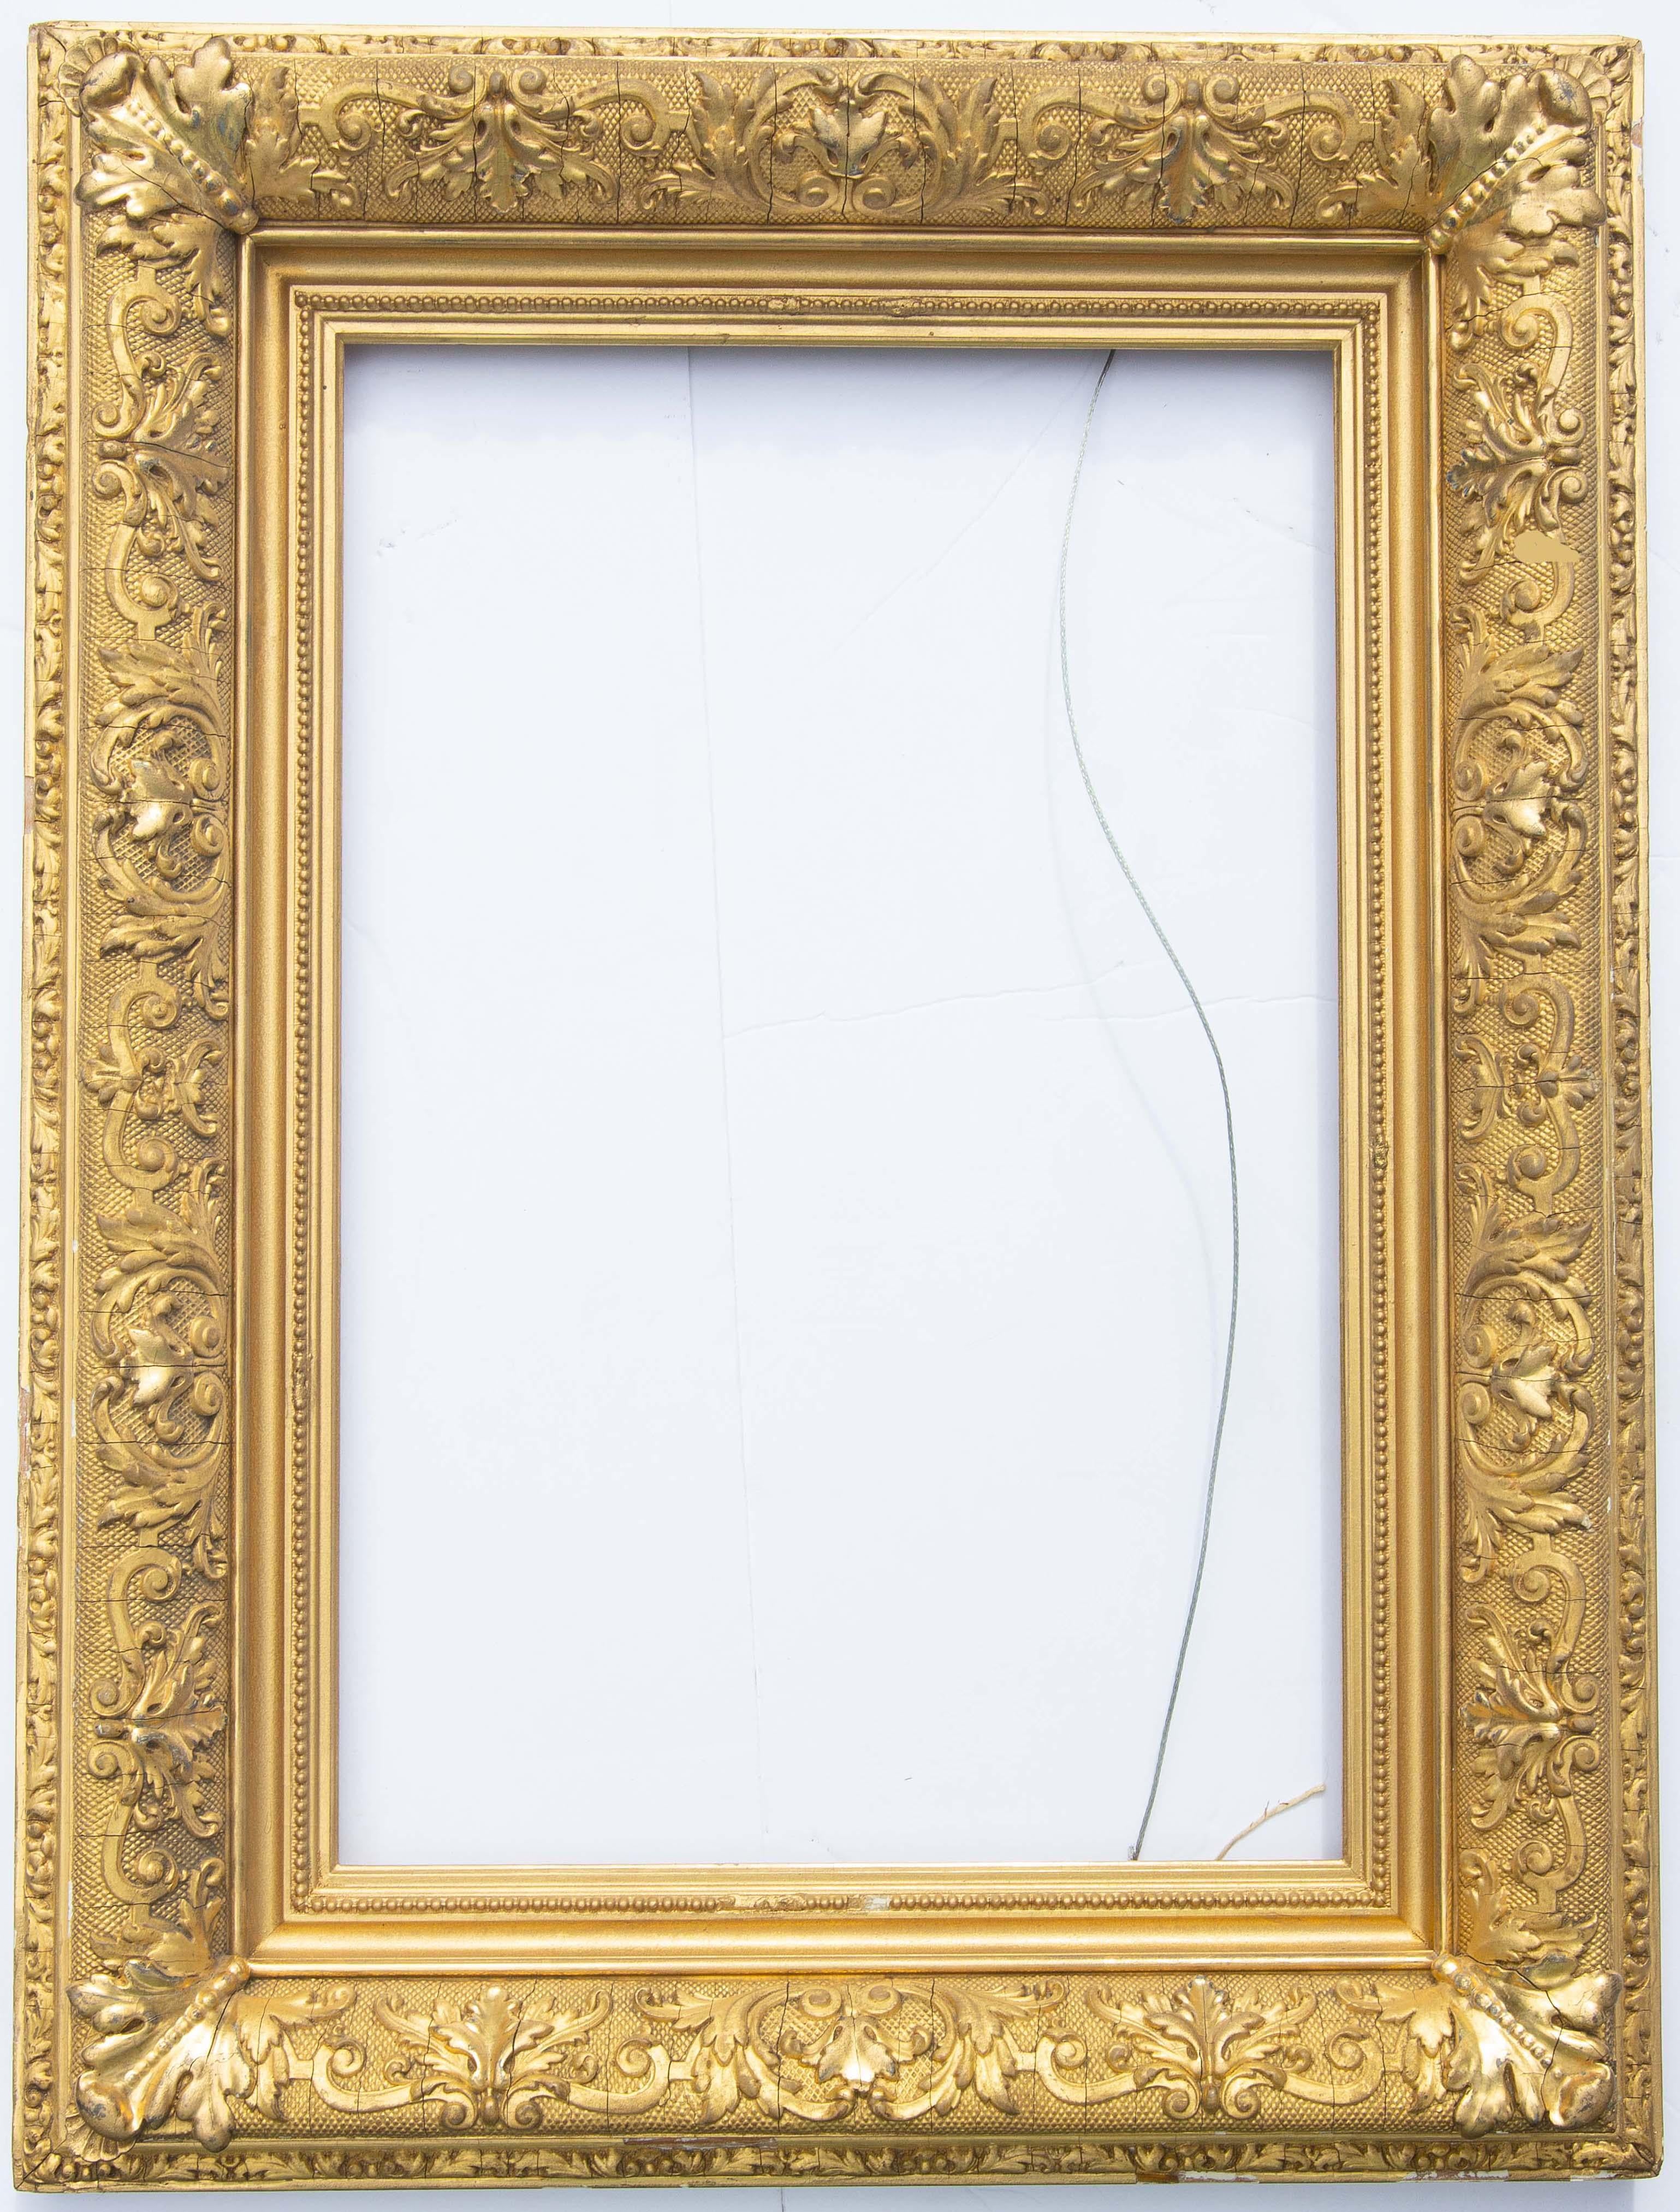 Good quality 19th century continental picture frame. Gold leafed gesso. Rabbet size 12